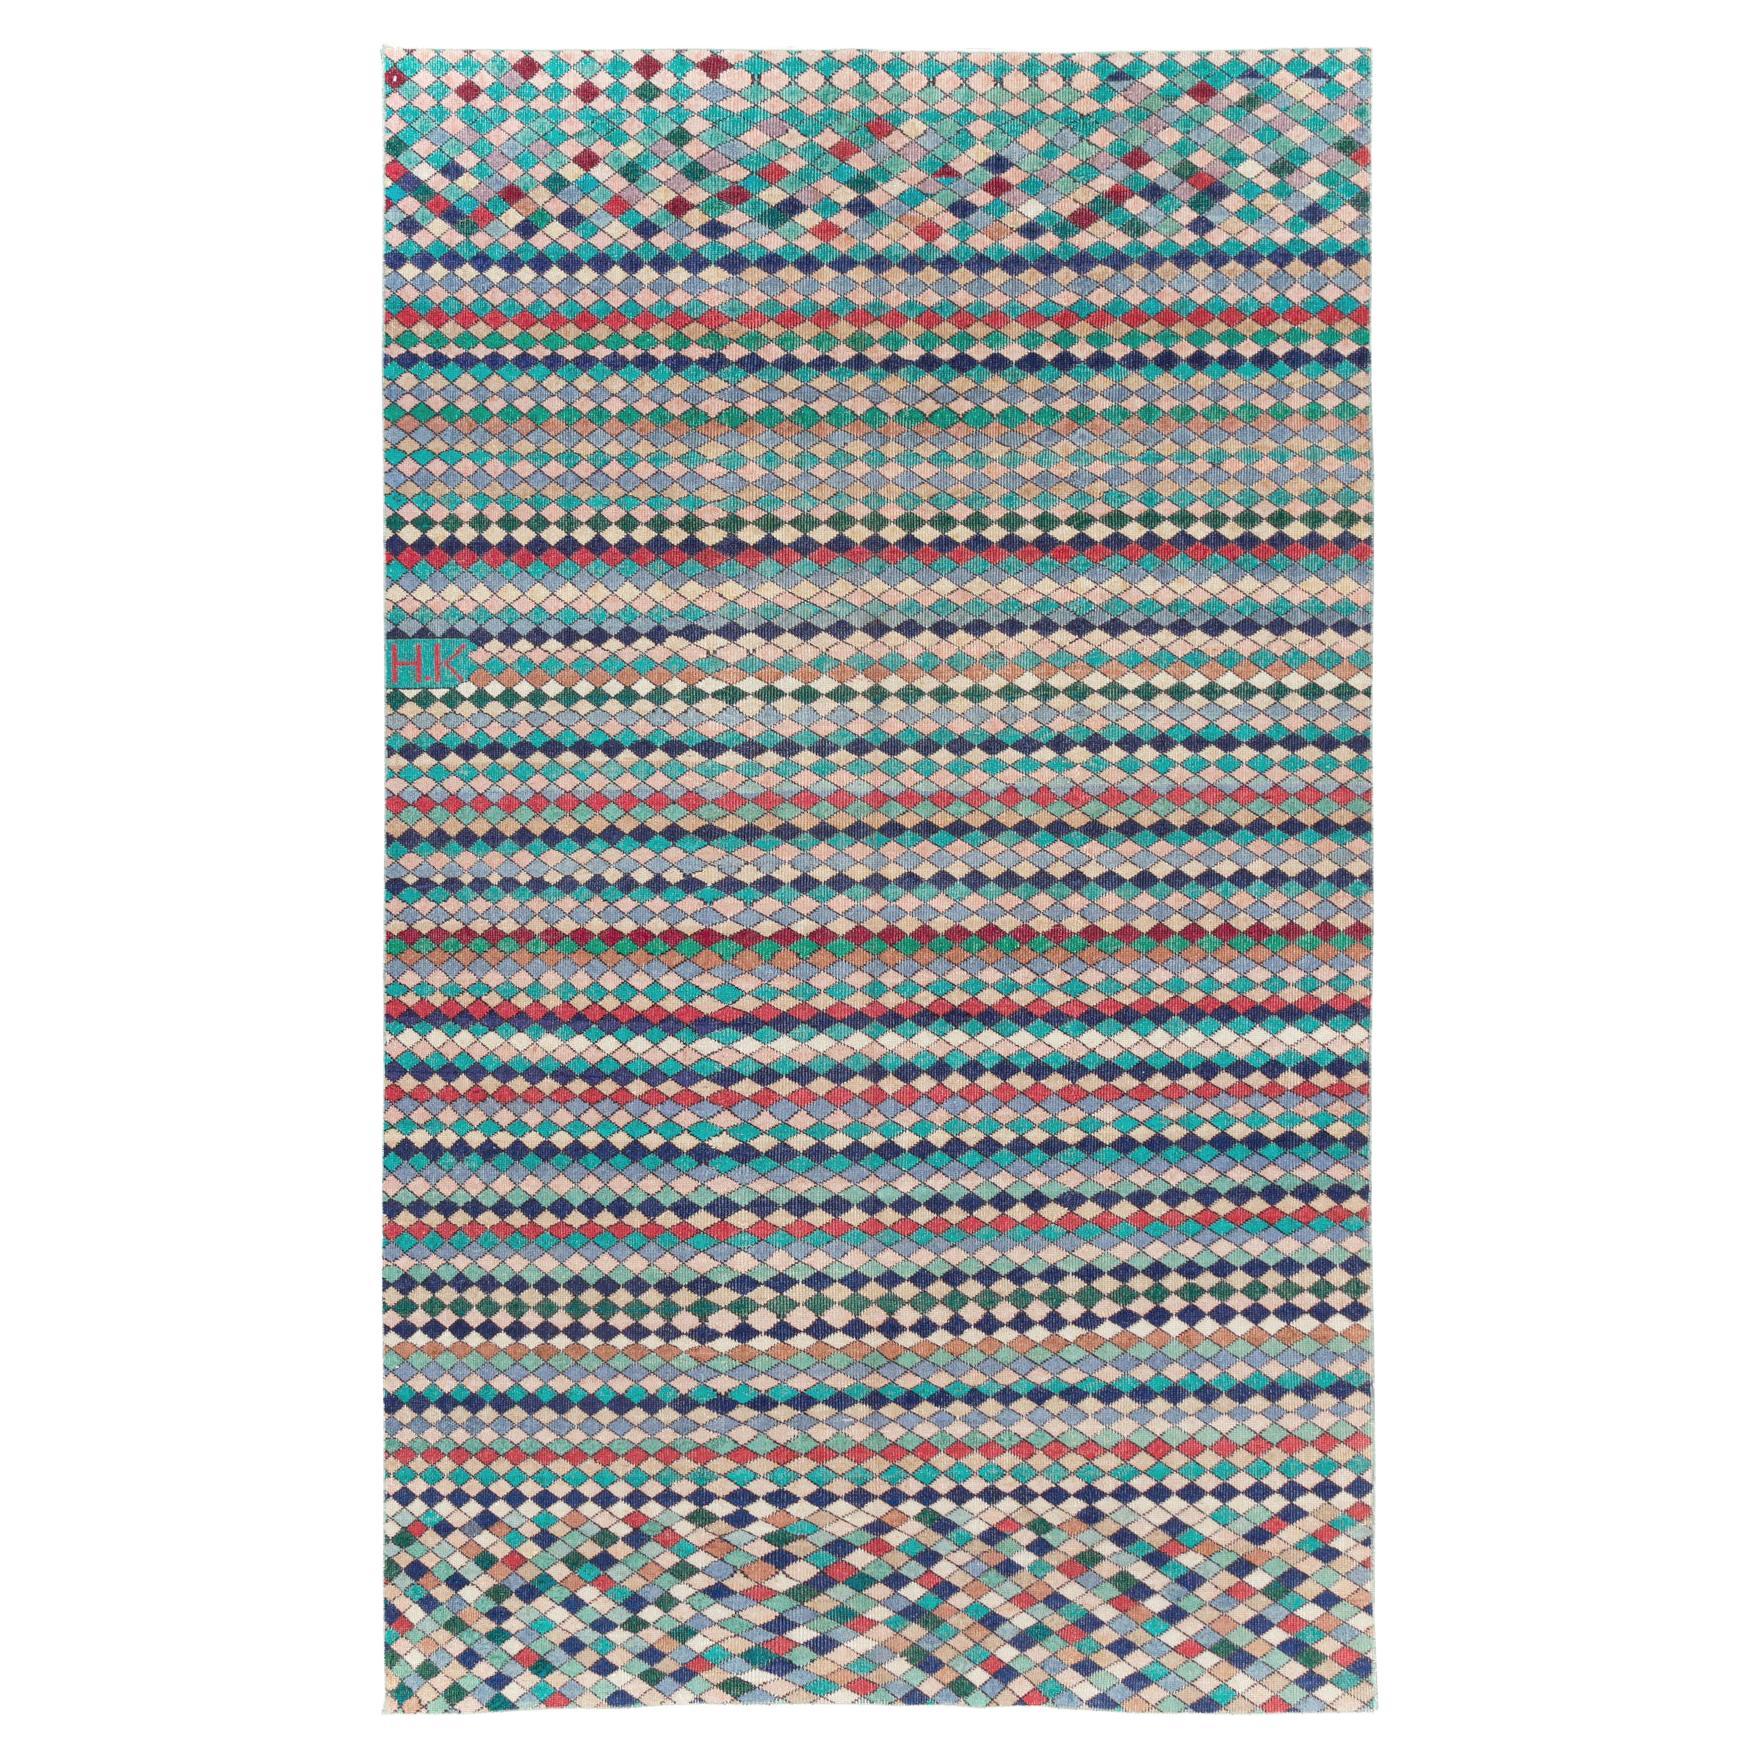 Mid-20th Century Handmade Turkish Accent Rug in Teal and Turquoise For Sale